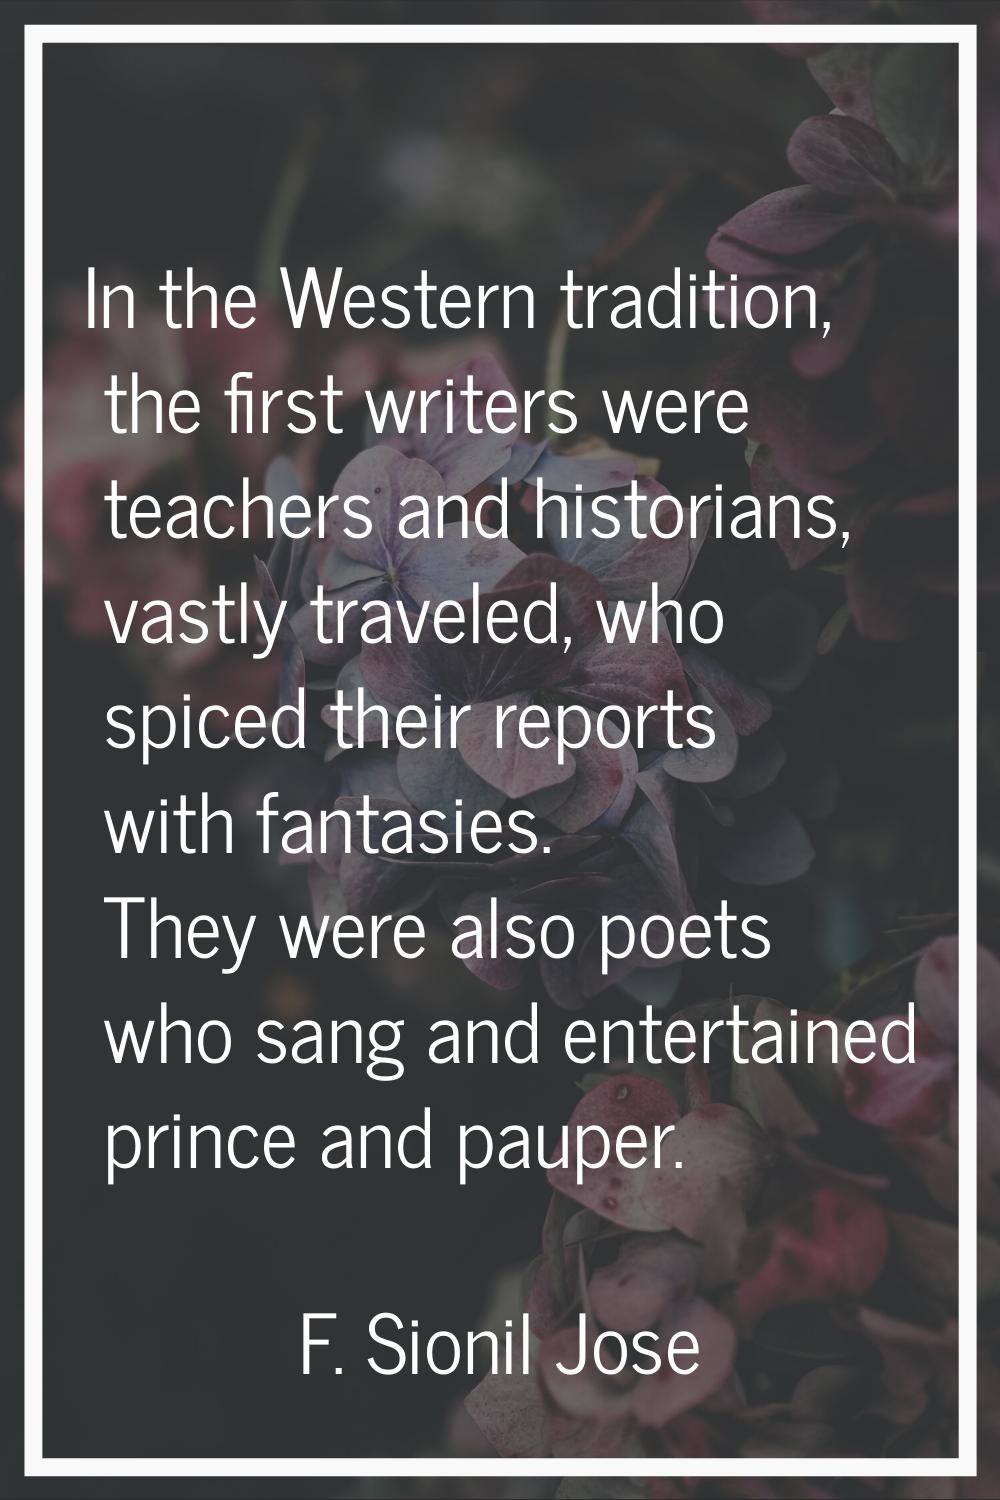 In the Western tradition, the first writers were teachers and historians, vastly traveled, who spic